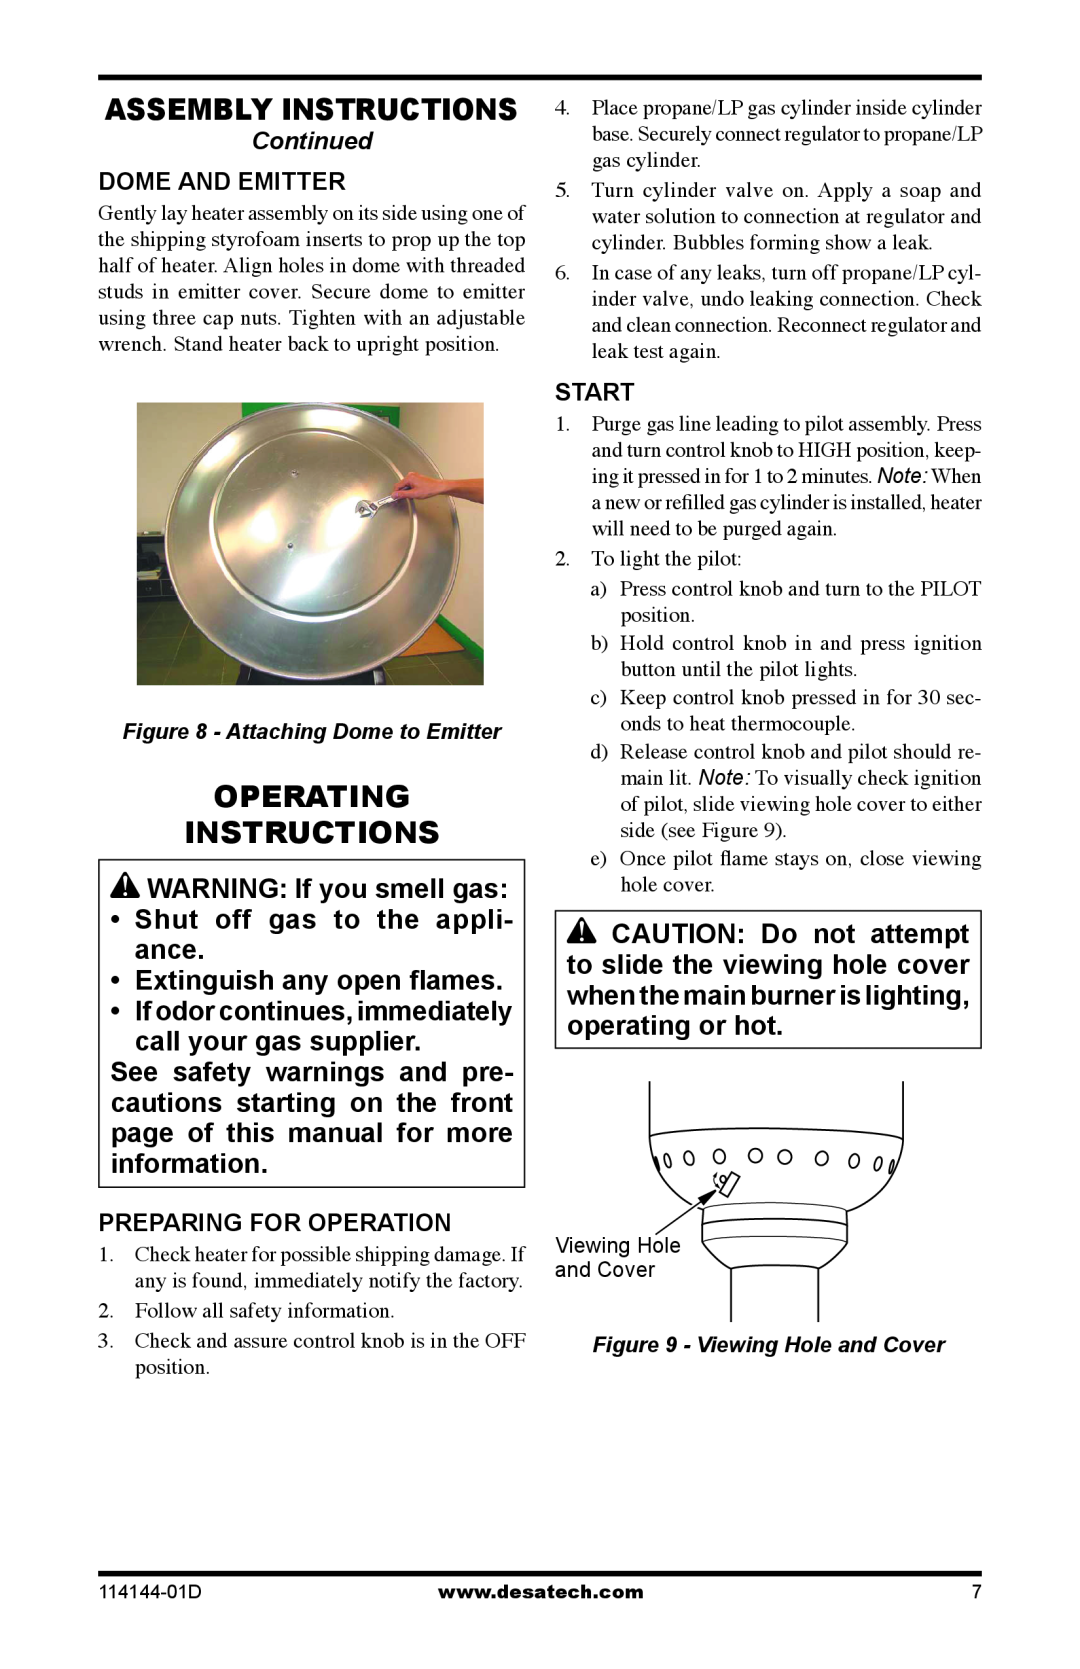 Desa SPC-54PHT Operating Instructions, Assembly Instructions, WARNING If you smell gas, Shut off gas to the appli- ance 